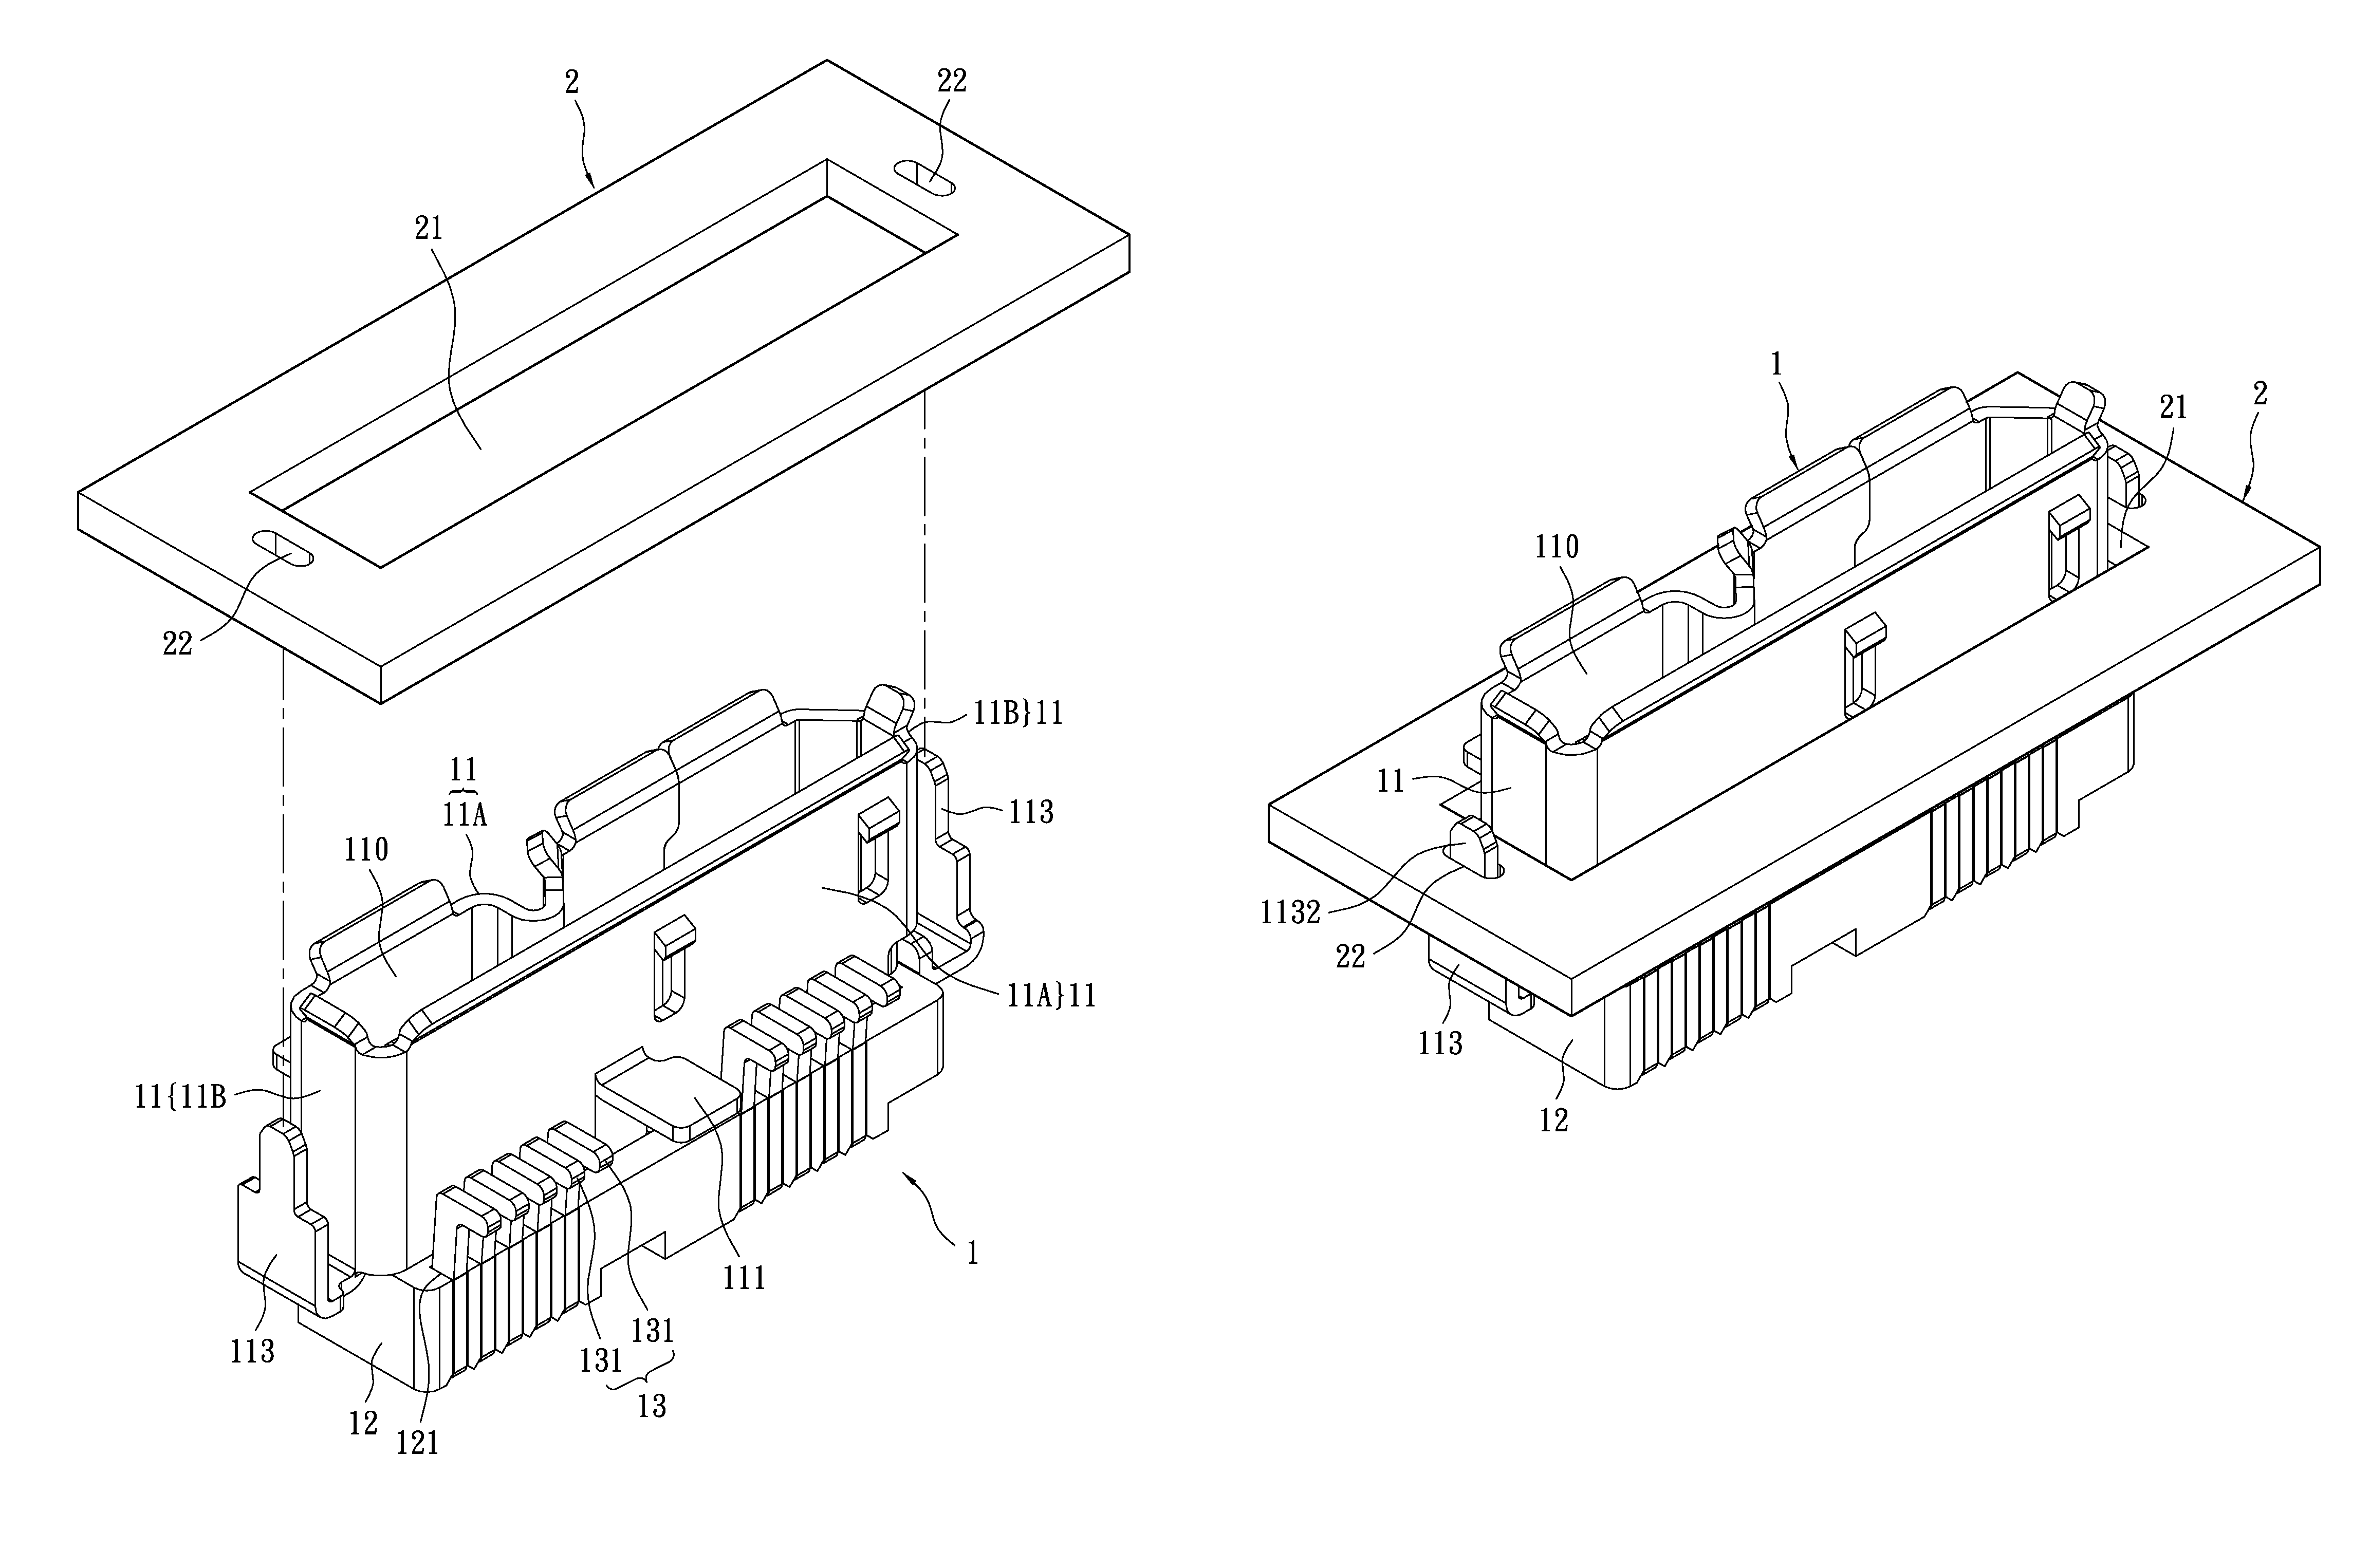 Connector mounted vertically through a hole in a printed circuit board